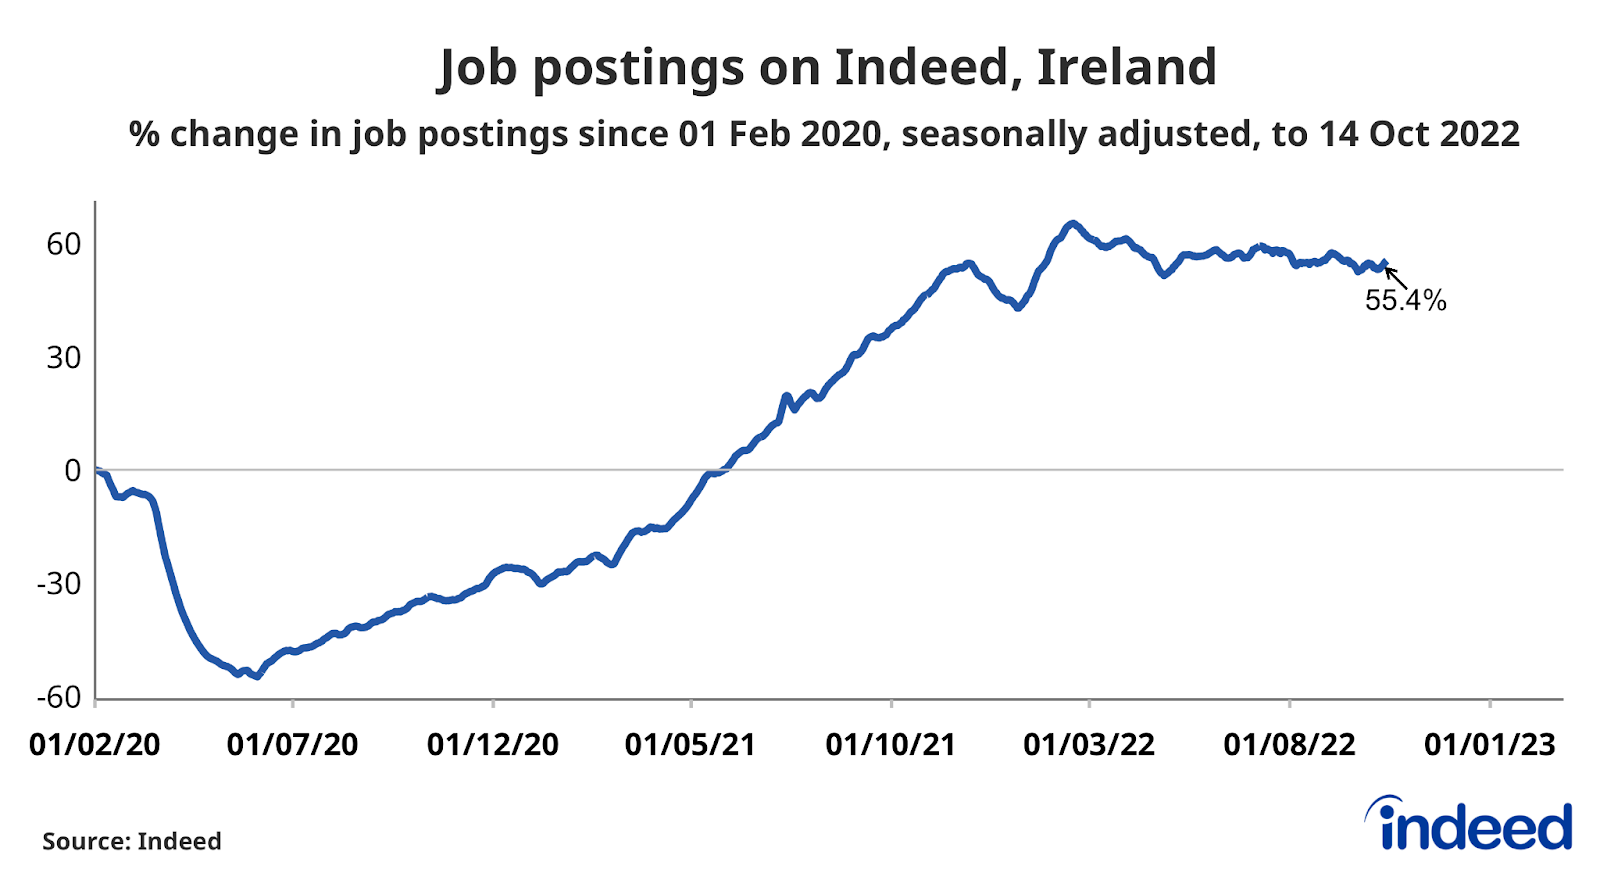 A line graph titled “Job postings on Indeed, Ireland” showing the percentage change in job postings on Indeed Ireland since 01 Feb 2020, seasonally adjusted, to 14 October 2022.